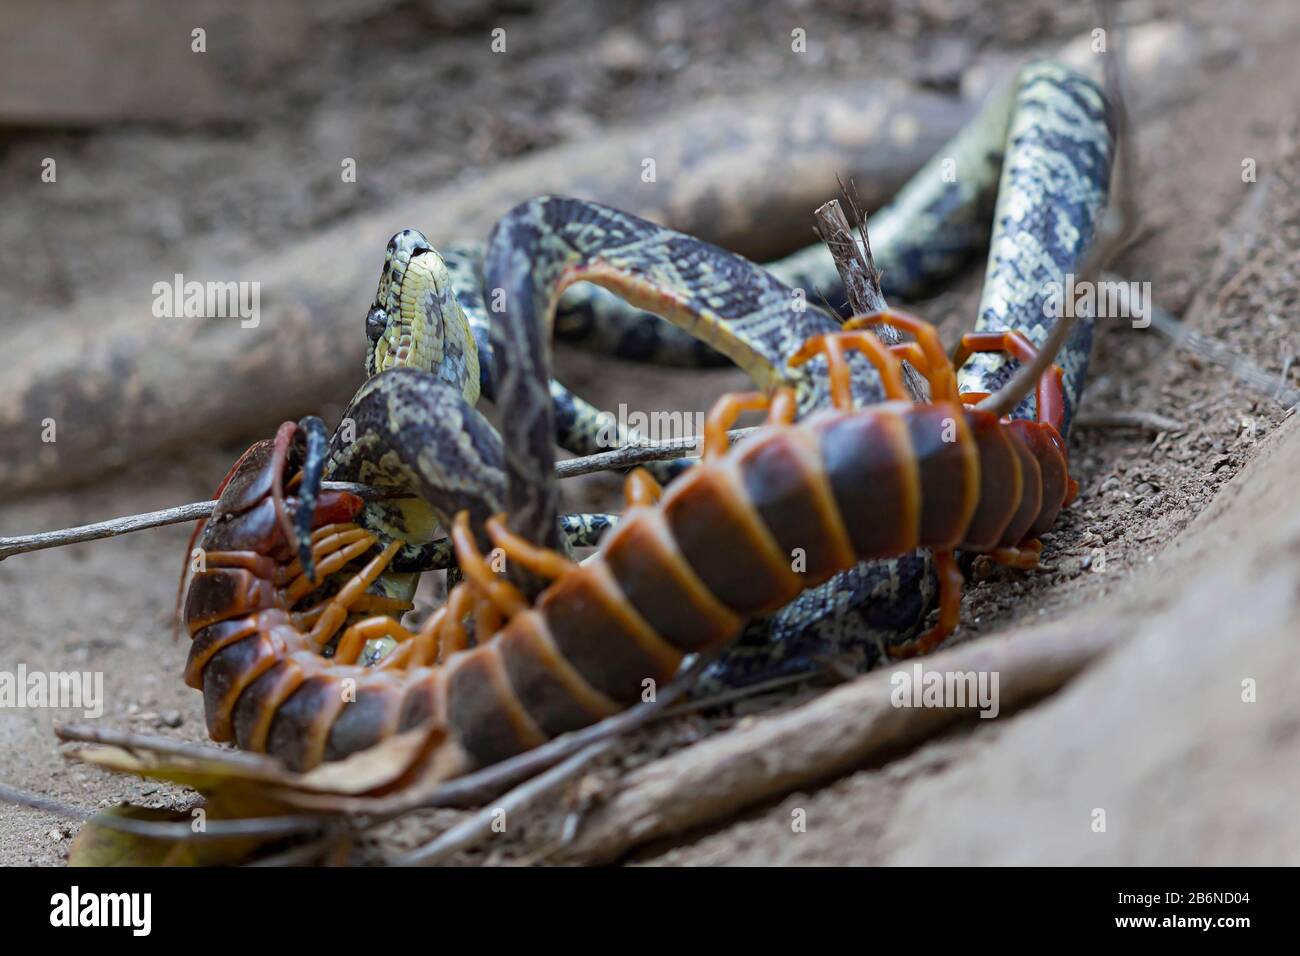 A Ringed Tree Boa (Corallus annulatus) is struggeling for Life with a Giant Centipede Stock Photo